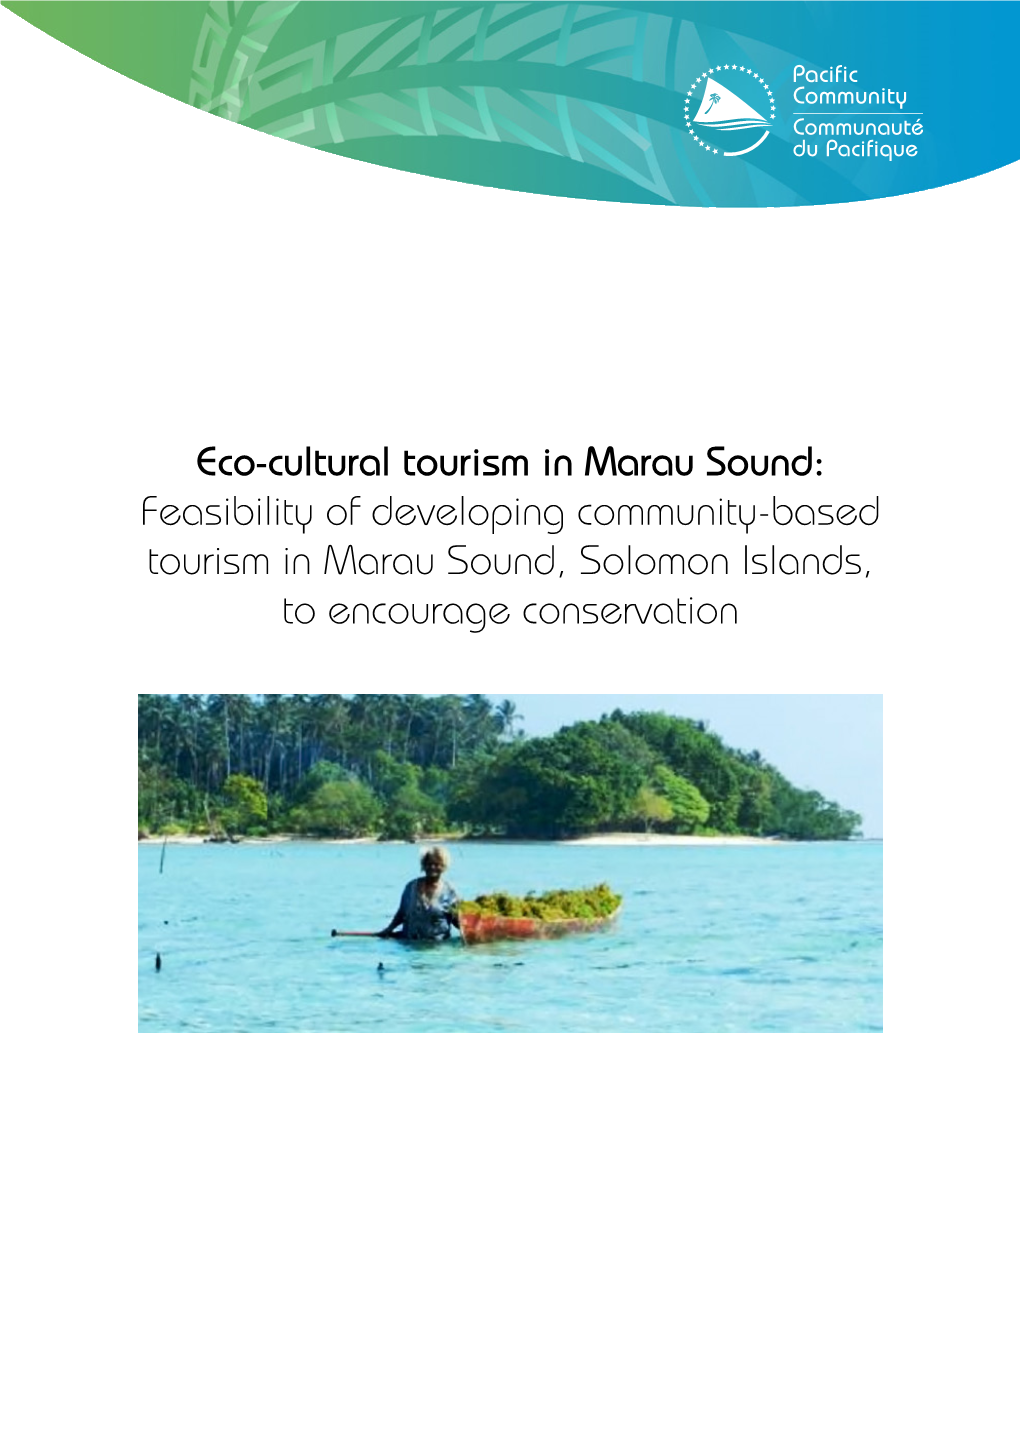 Eco-Cultural Tourism in Marau Sound: Feasibility of Developing Community-Based Tourism in Marau Sound, Solomon Islands, to Encourage Conservation